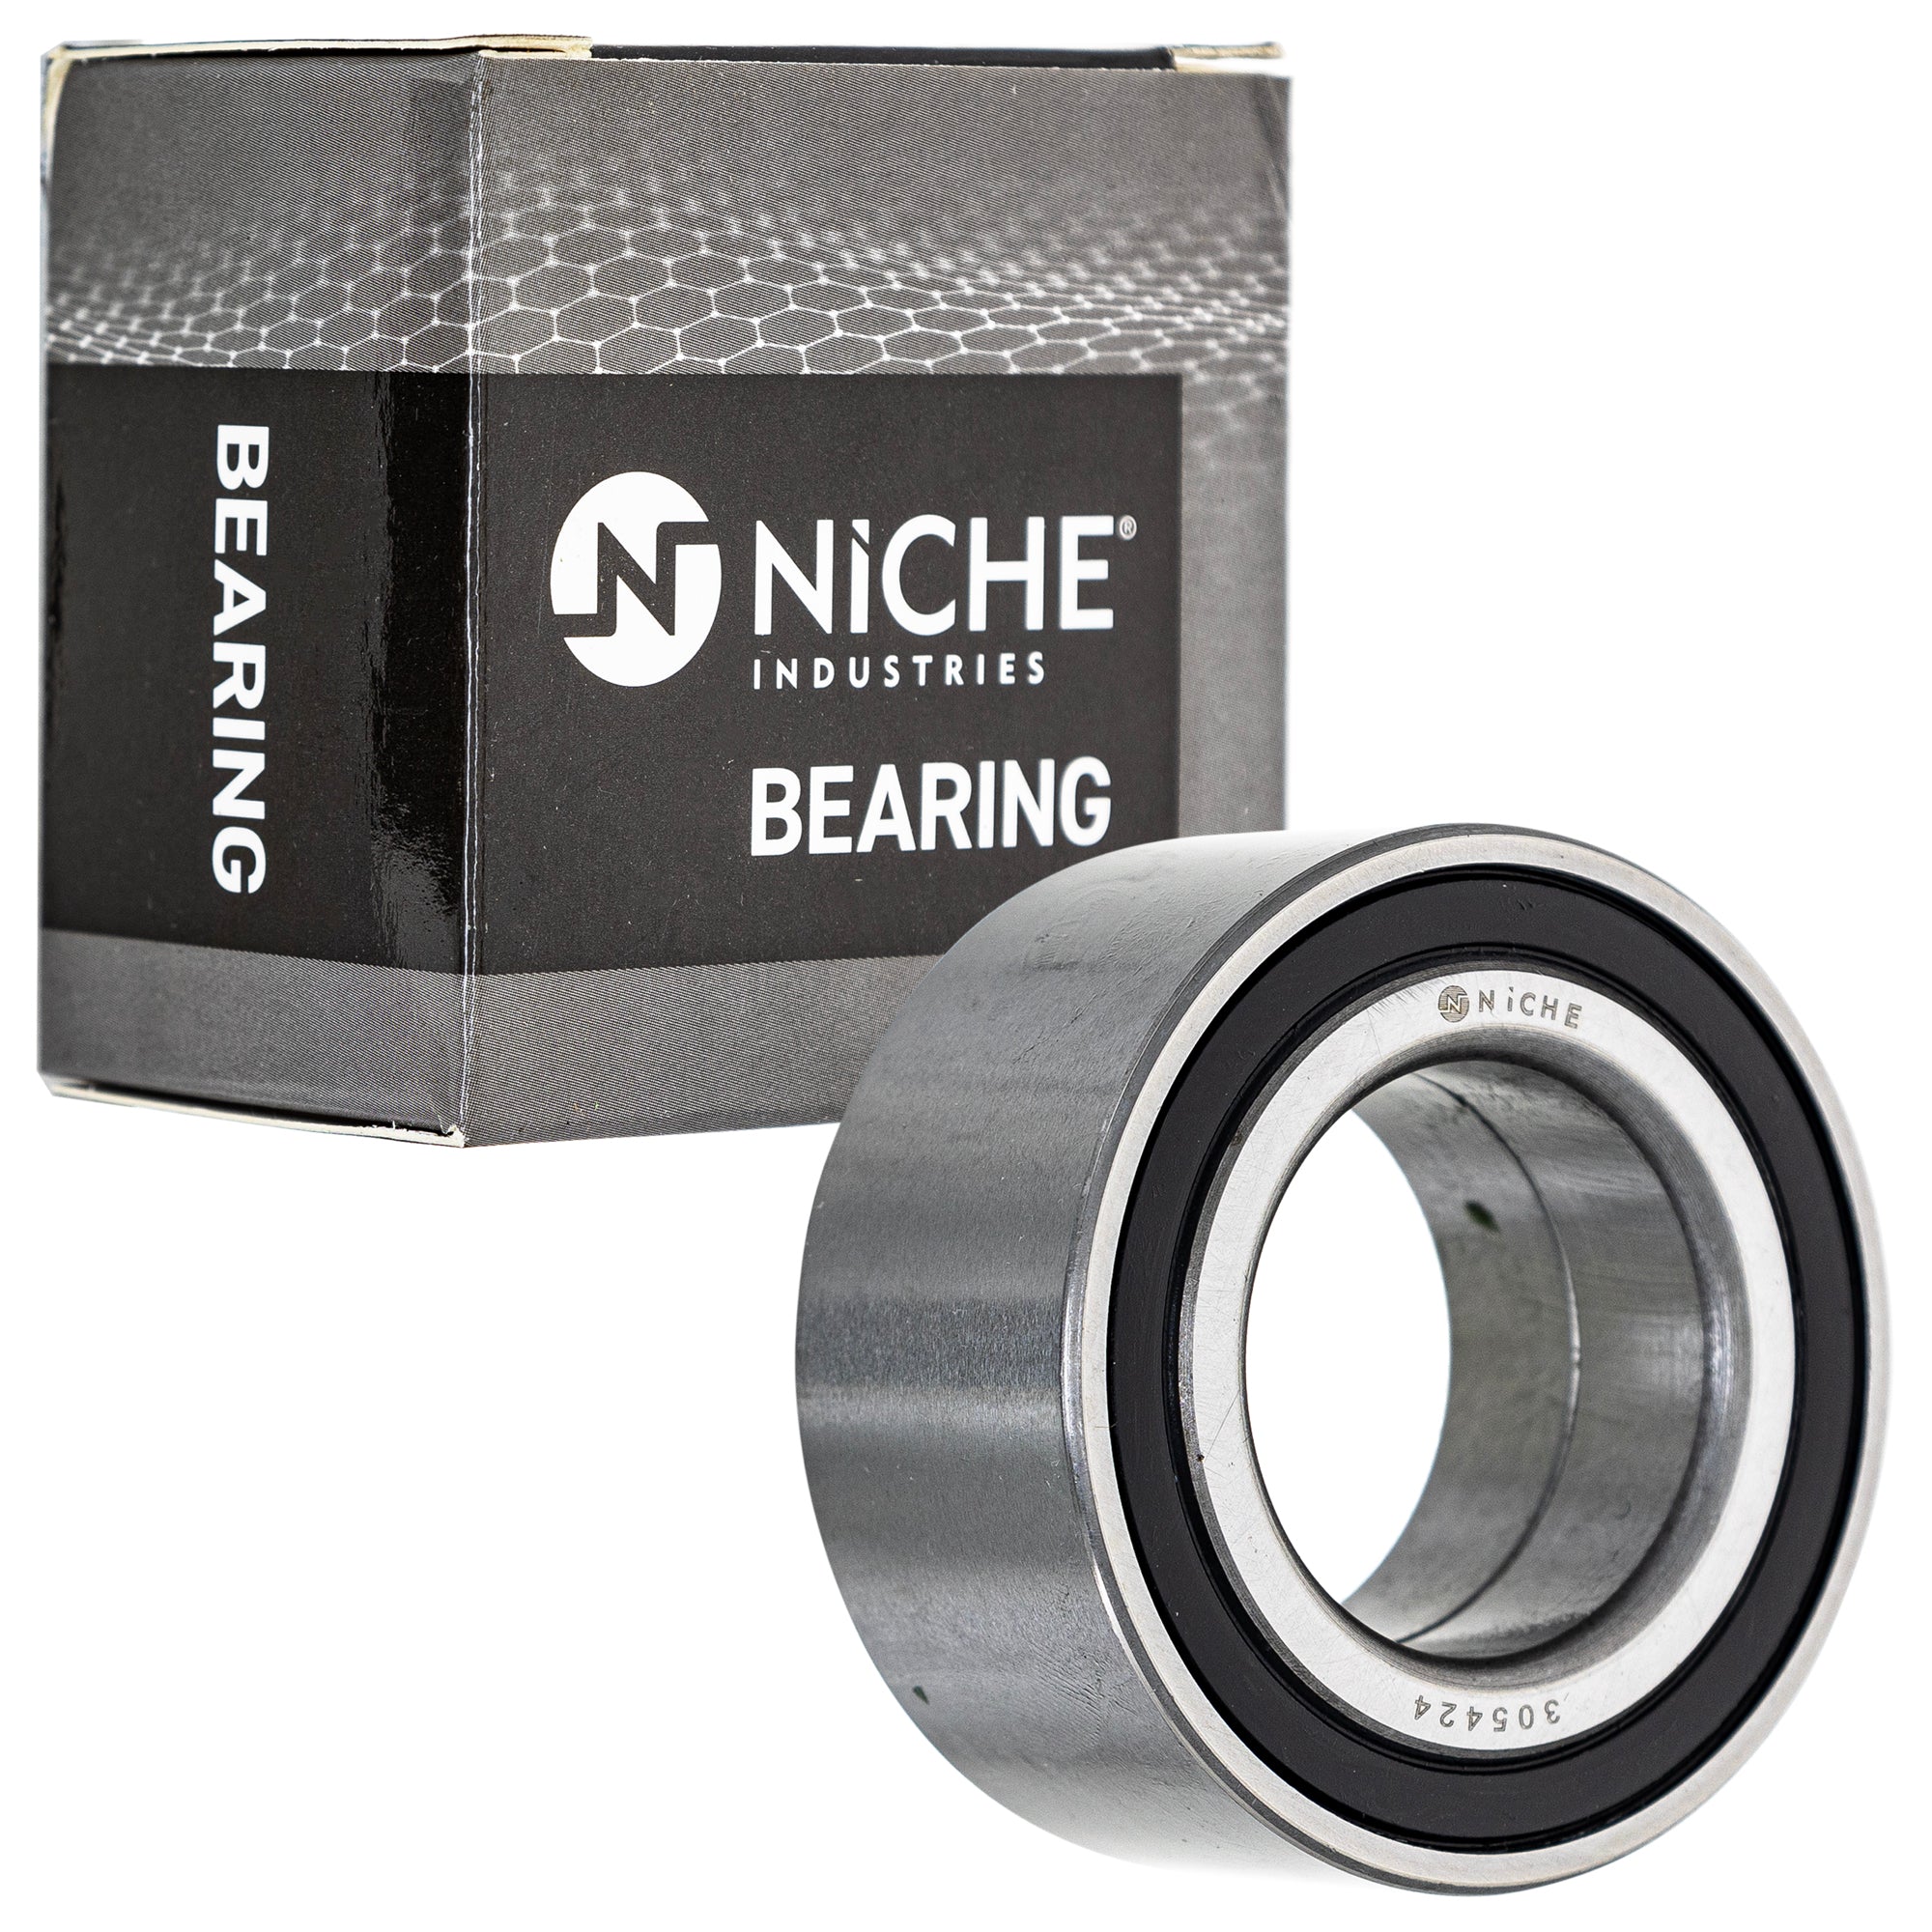 NICHE 519-CBB2255R Bearing 10-Pack for zOTHER BRP Can-Am Ski-Doo